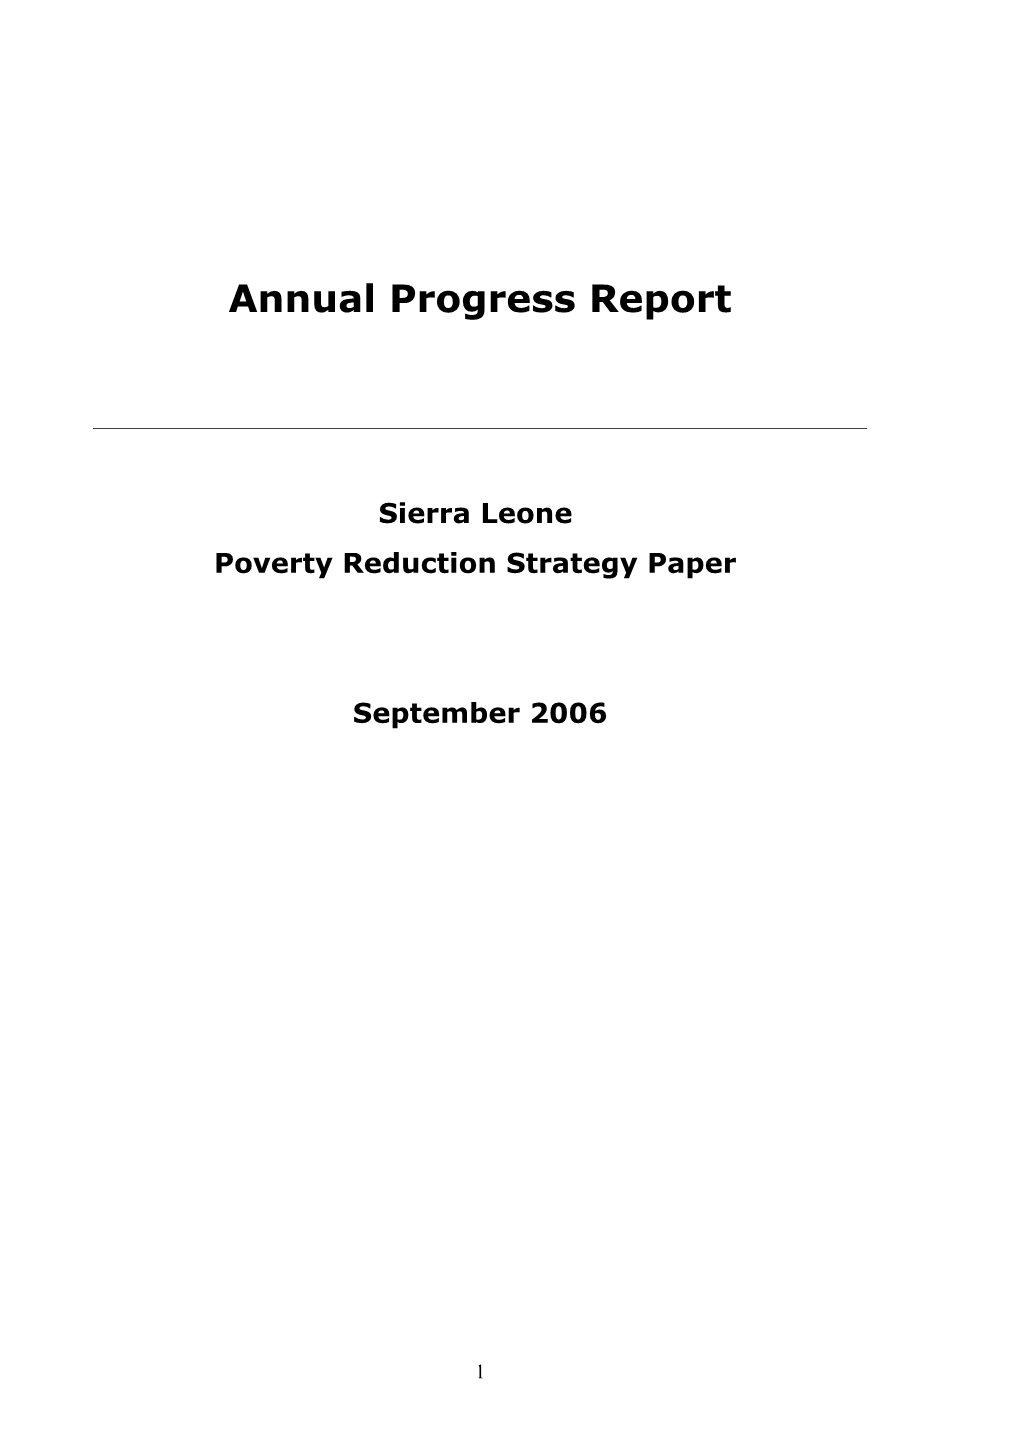 Poverty Report Strategy Paper (PRSP)